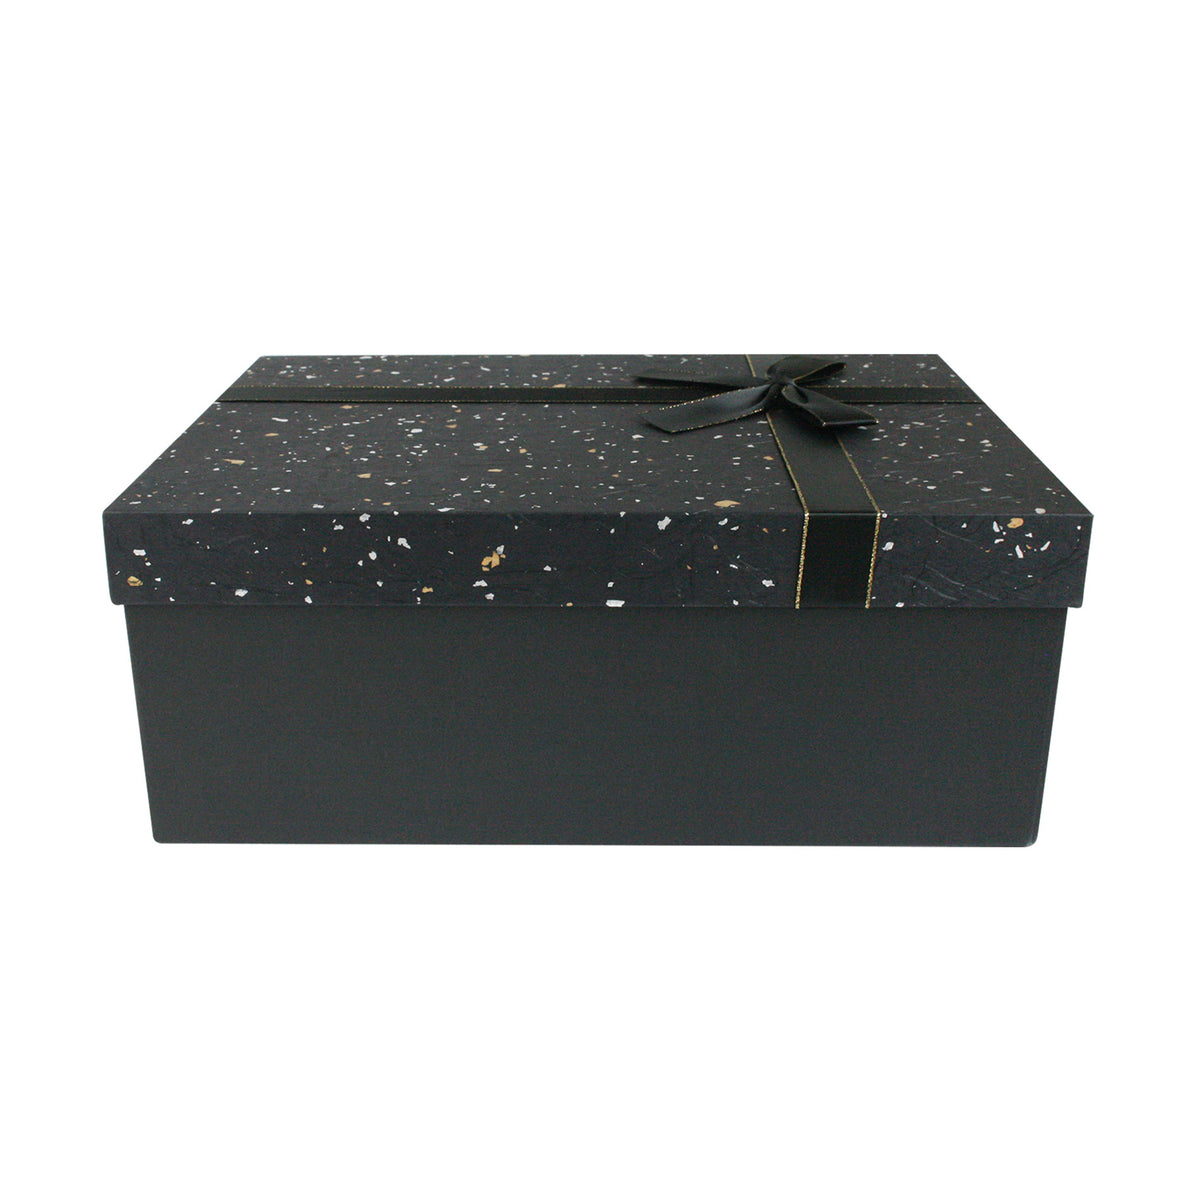 Single Black Gold Silver Speckled Gift Box